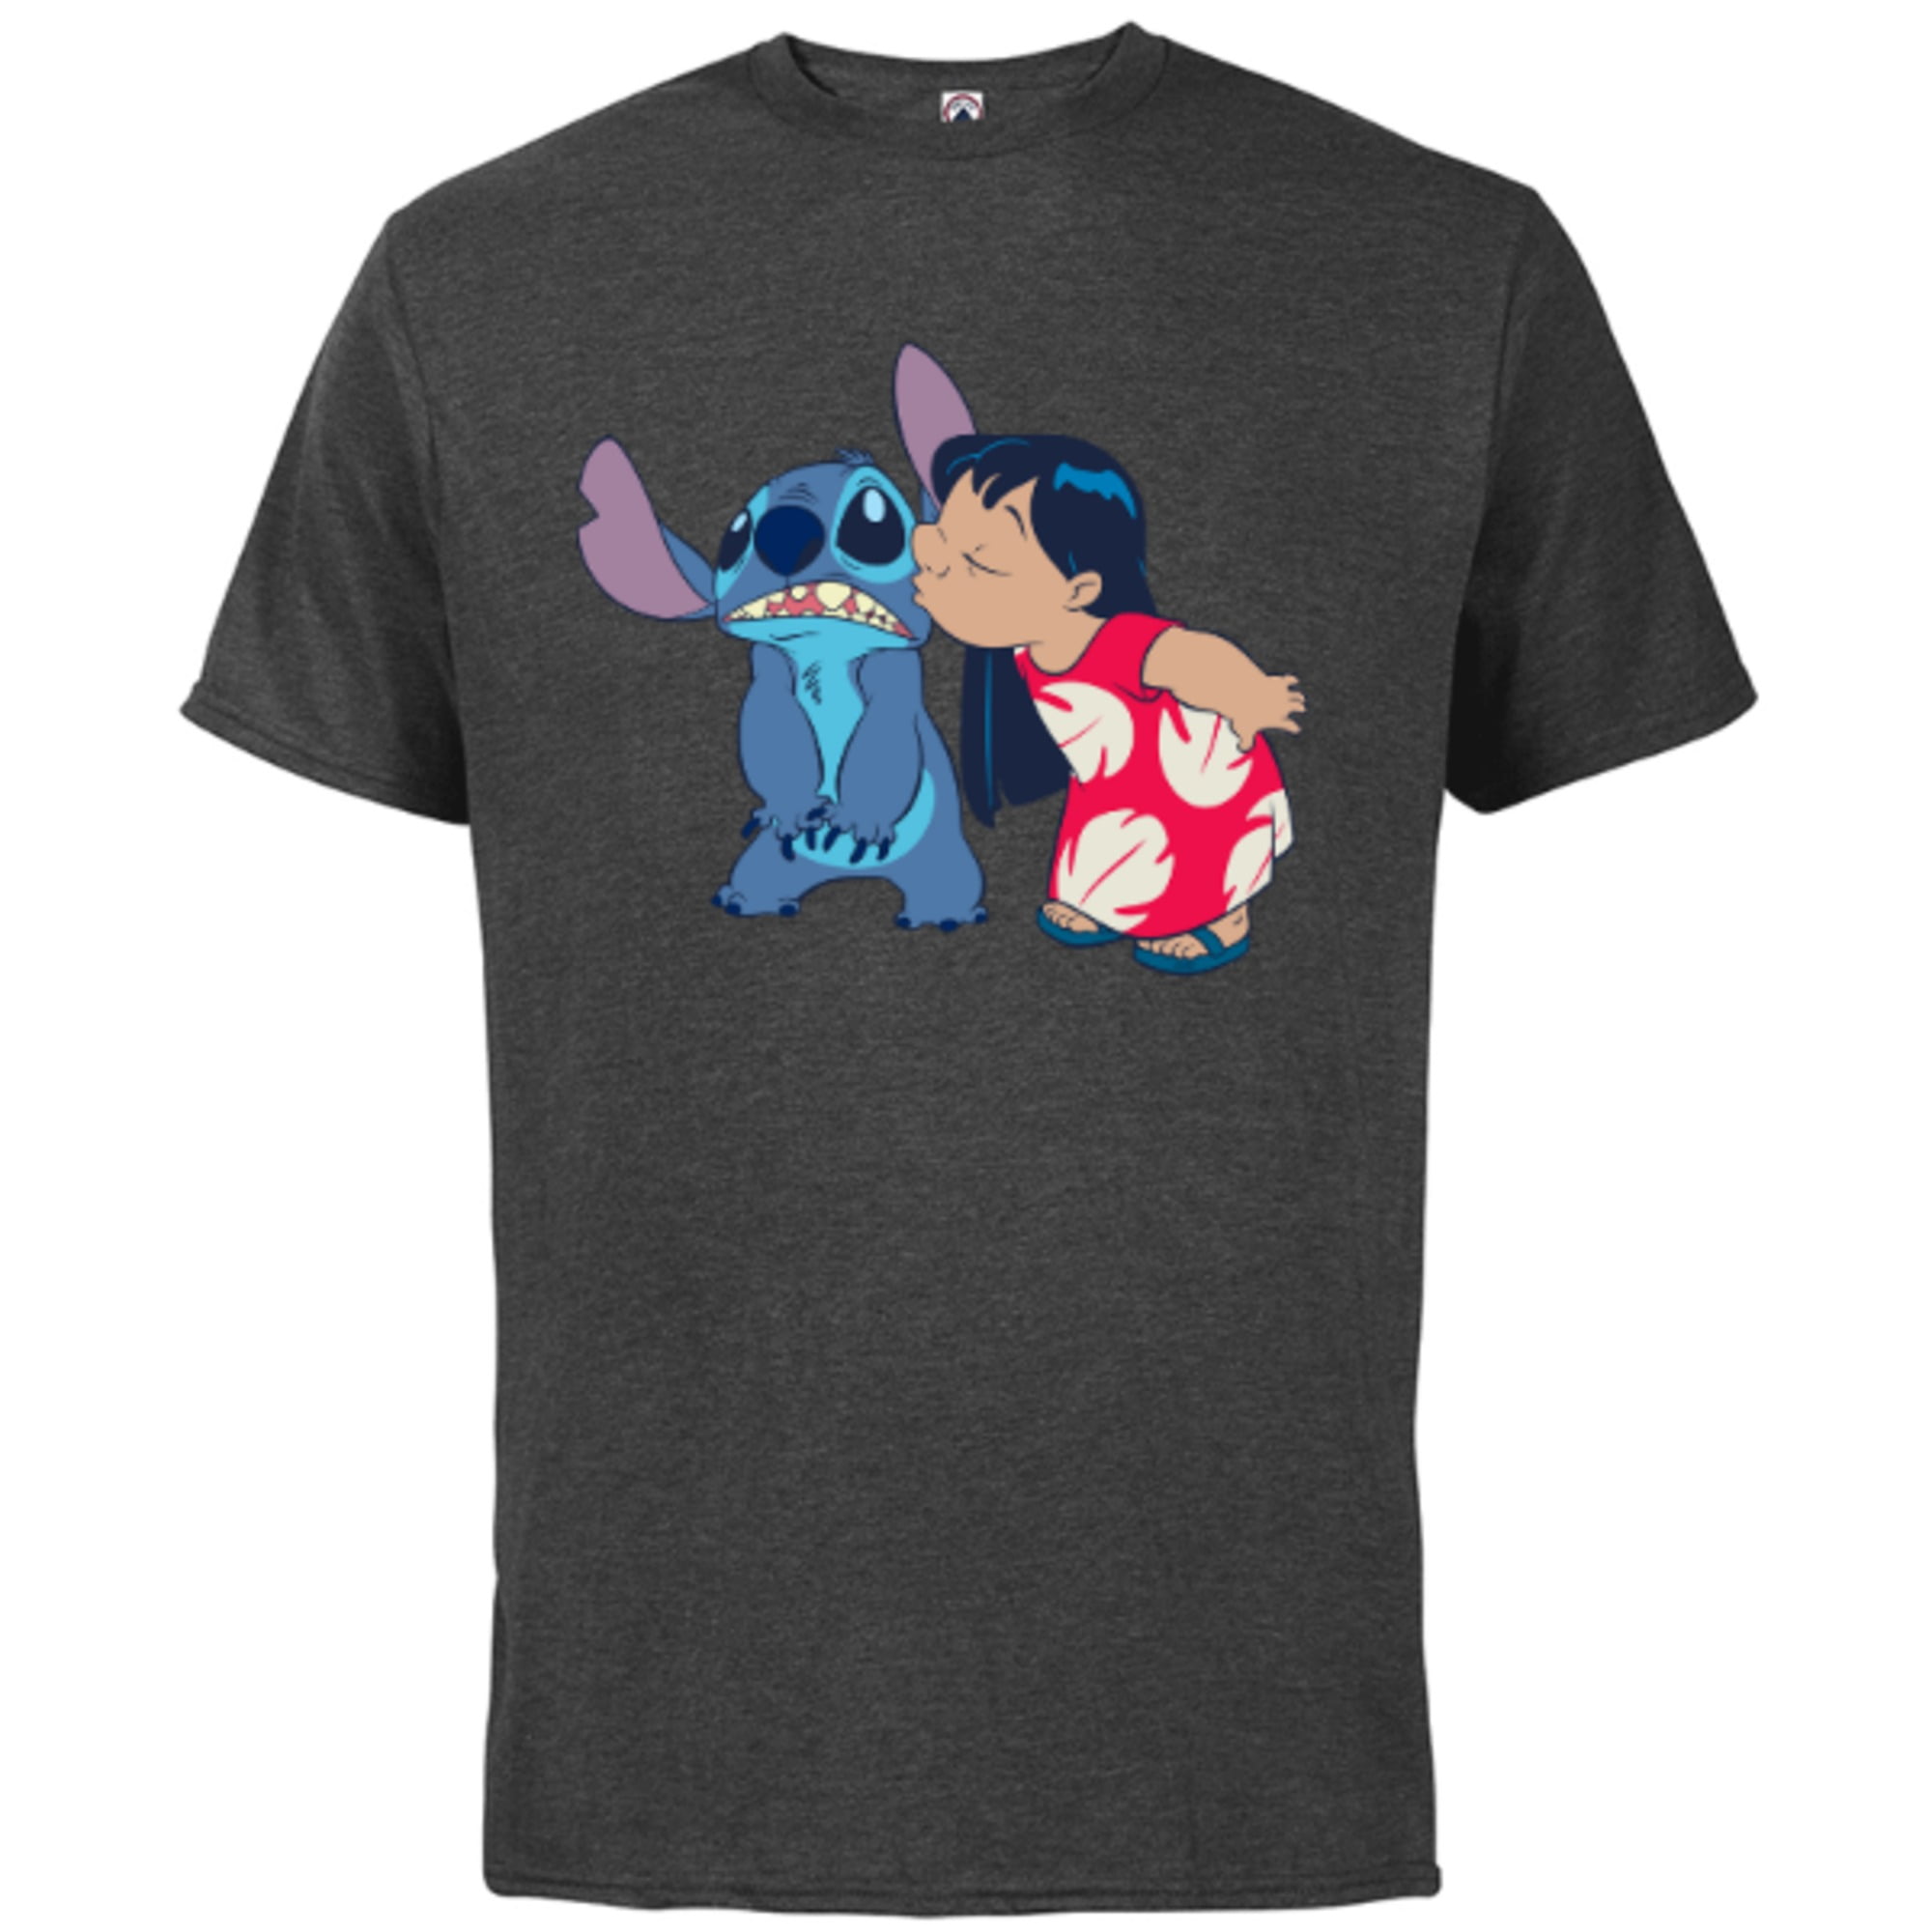 Disney Lilo and Stitch Funny Kisses - Short Sleeve Cotton T-Shirt for  Adults - Customized-White